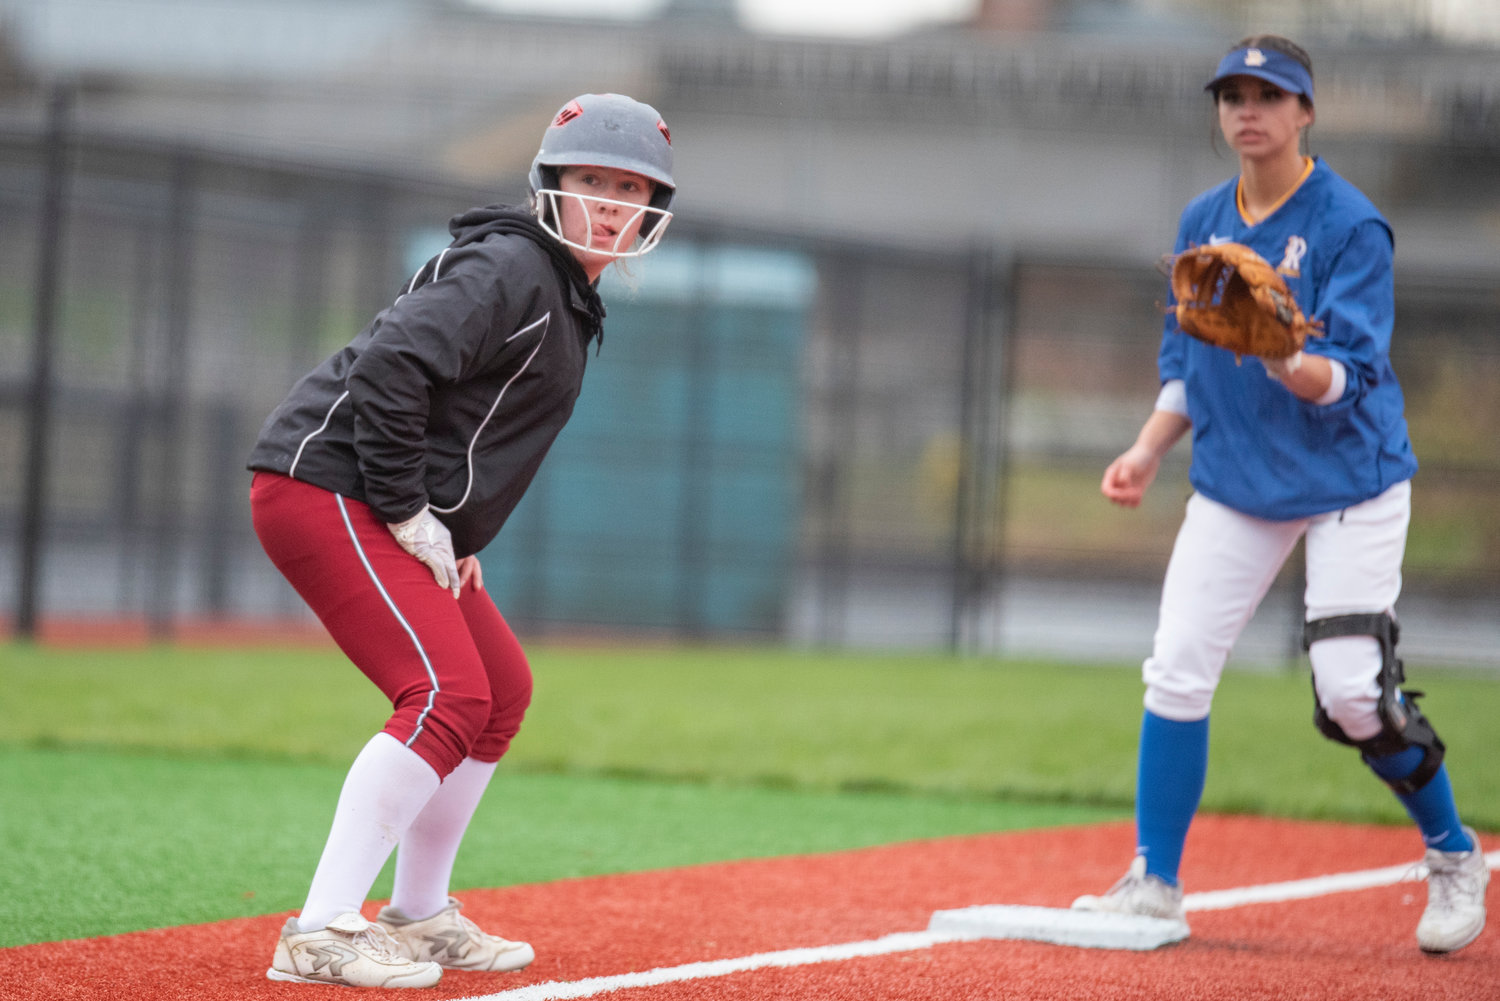 W.F. West's Lena Fragner watches home plate as Rochester third baseman Sadie Knutson covers third during a game at Chehalis Sports Complex on April 13.